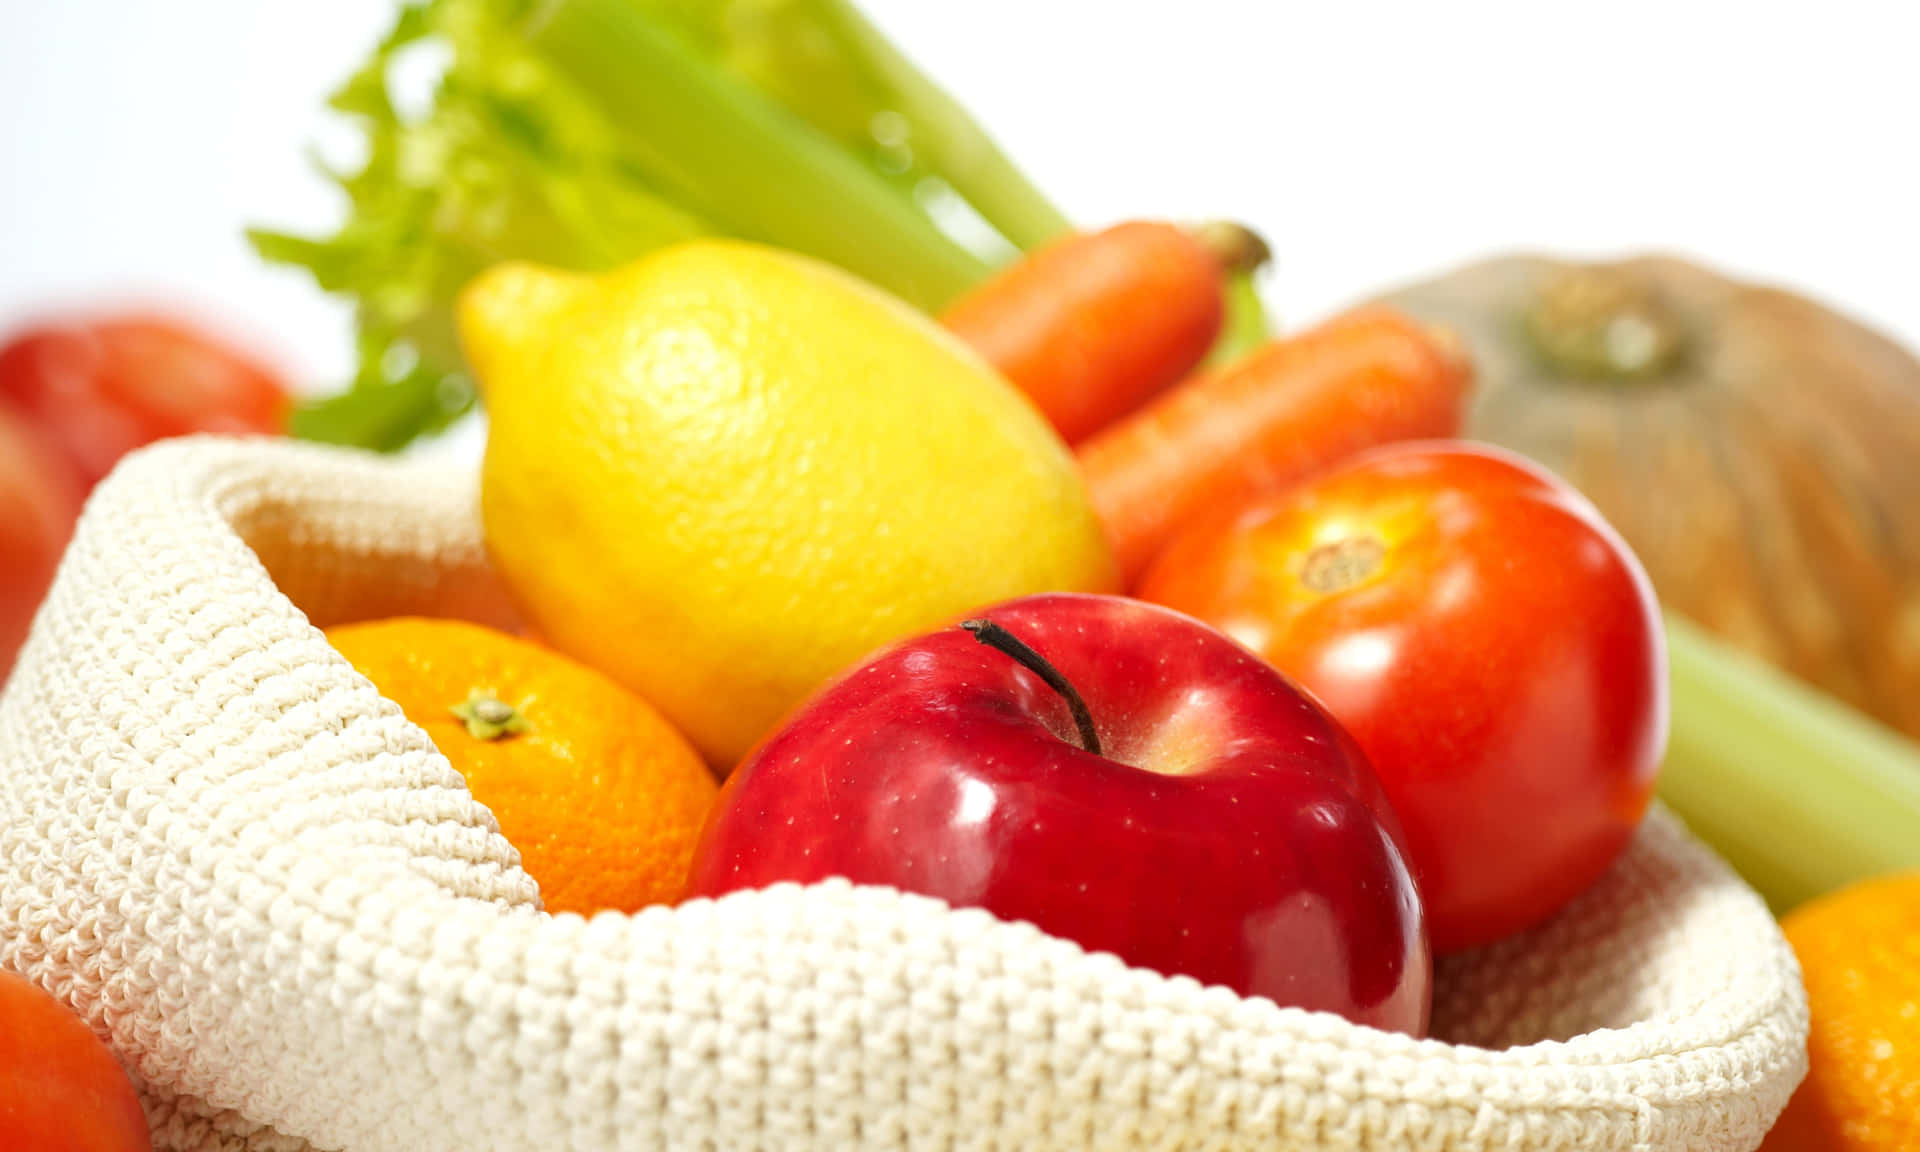 Fruits And Vegetables In A Knitted Basket Wallpaper